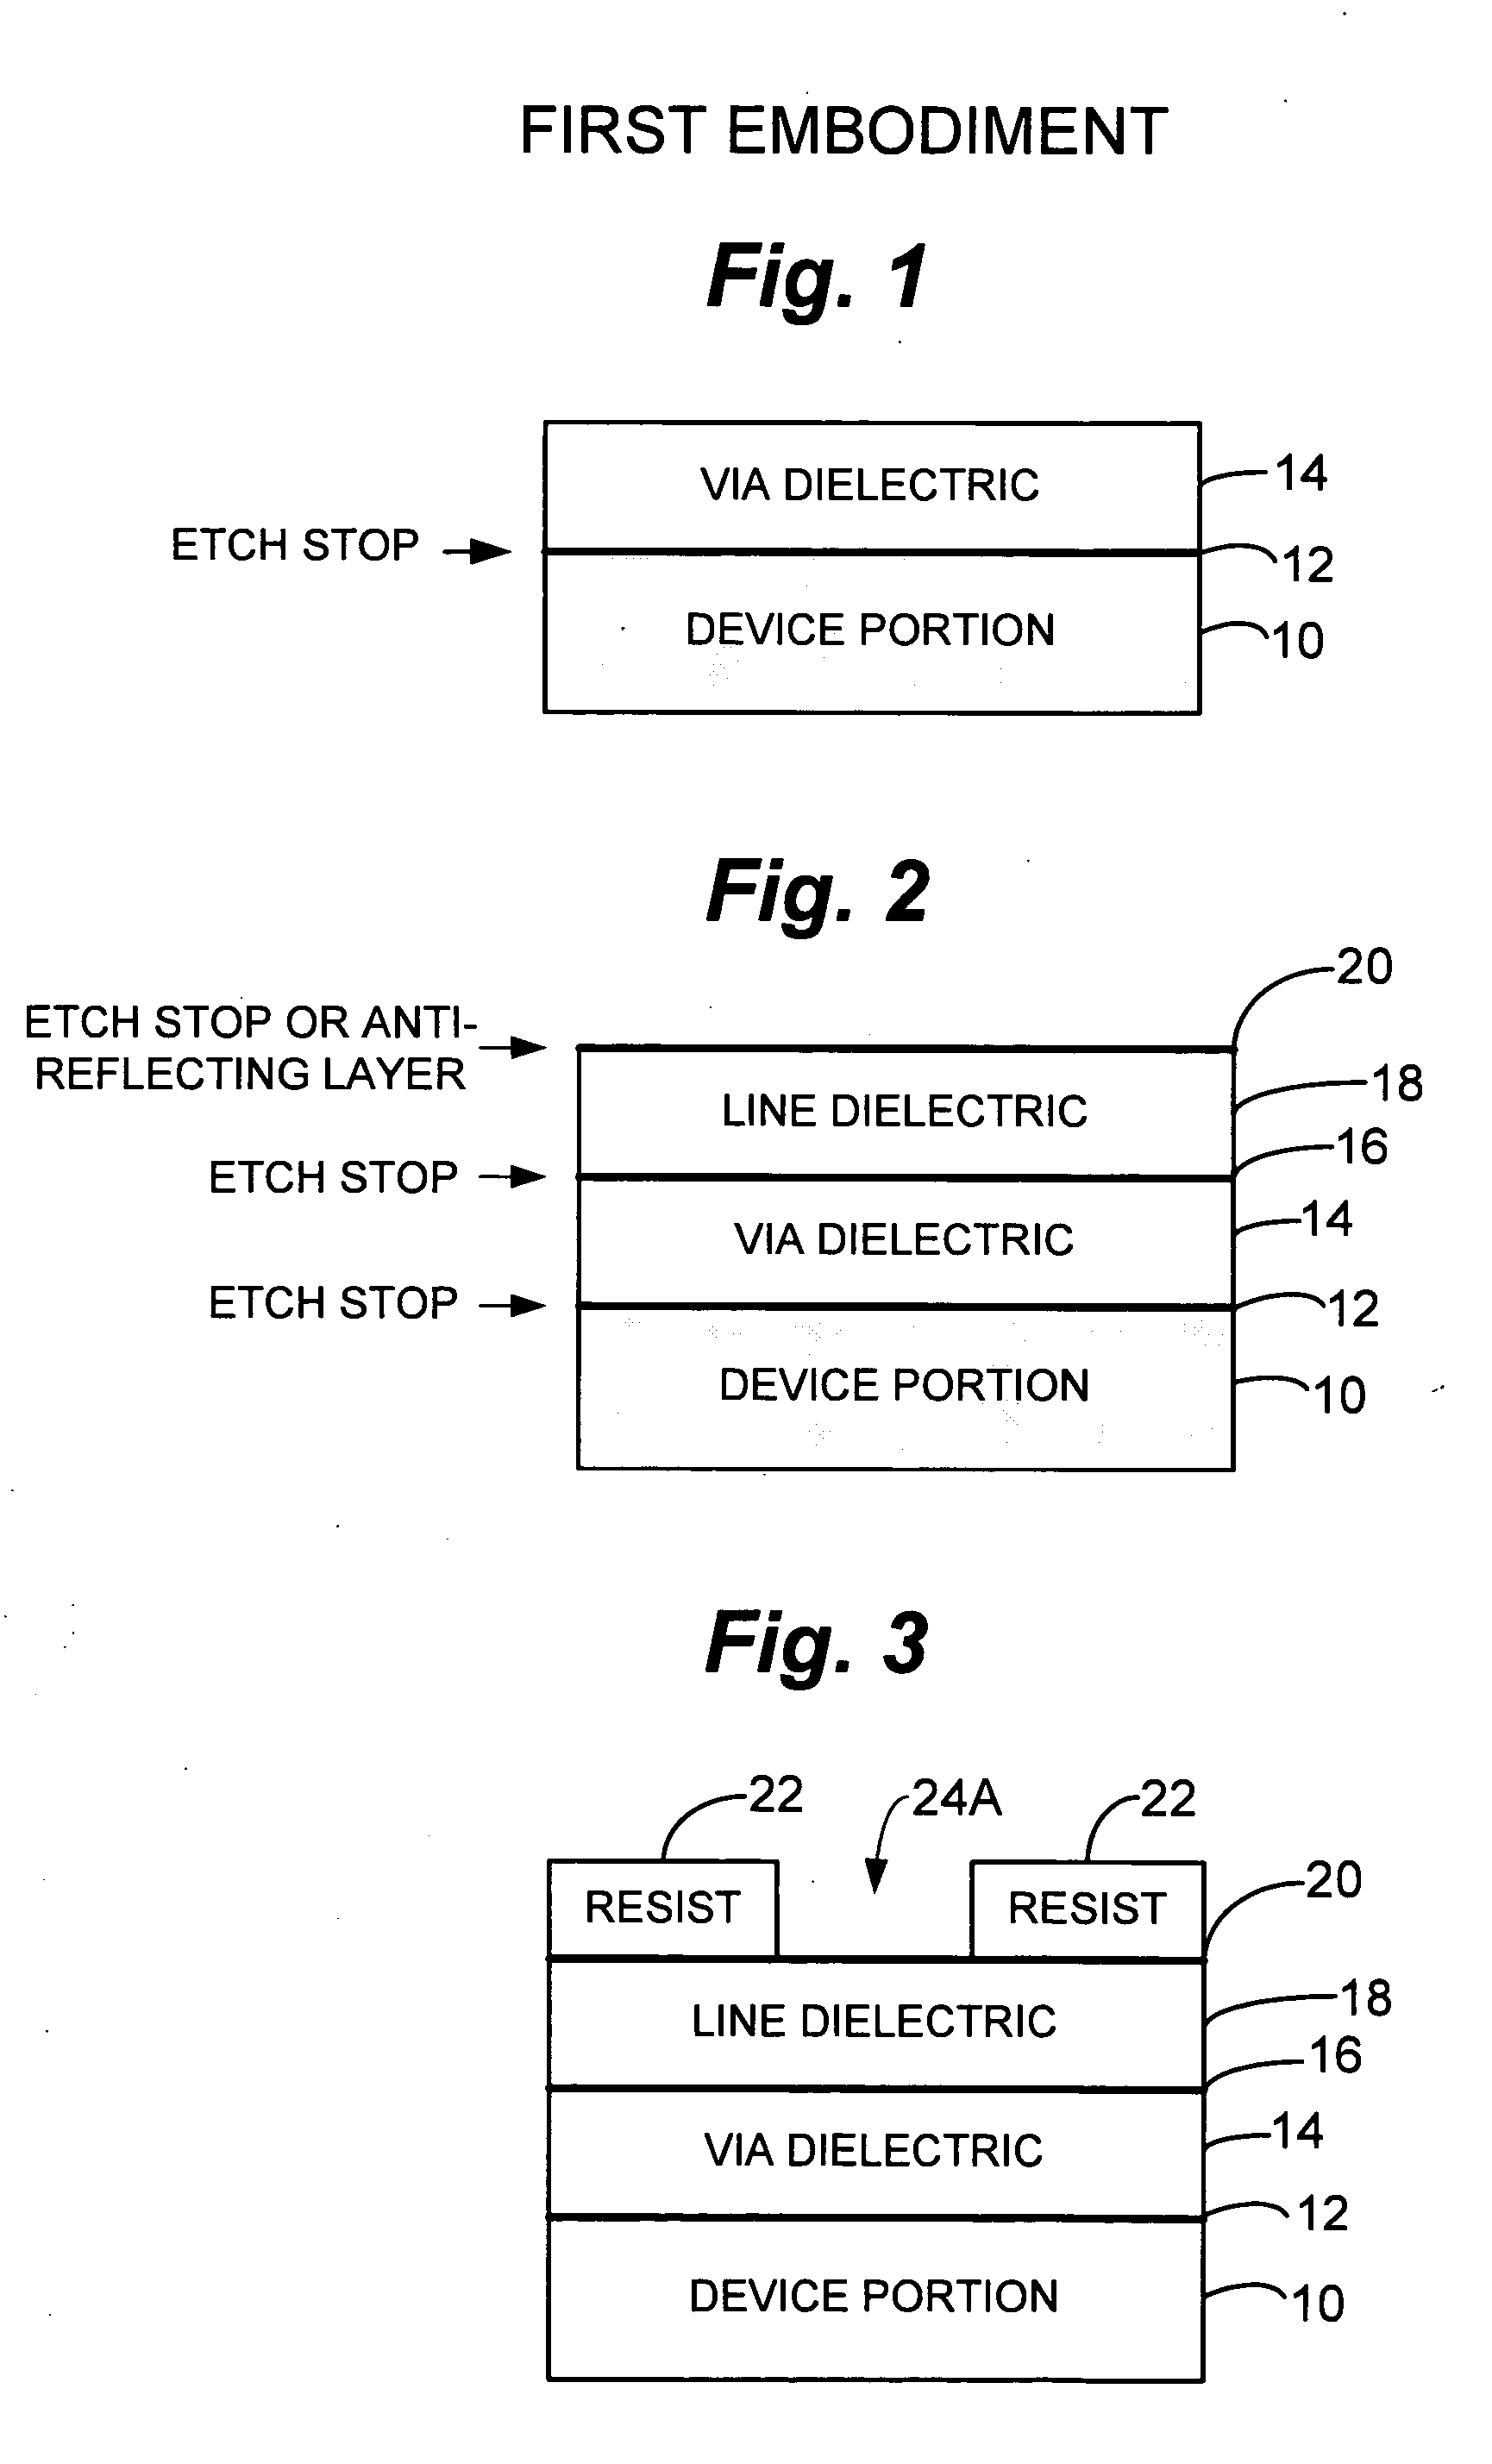 Air gap formation method for reducing undesired capacitive coupling between interconnects in an integrated circuit device